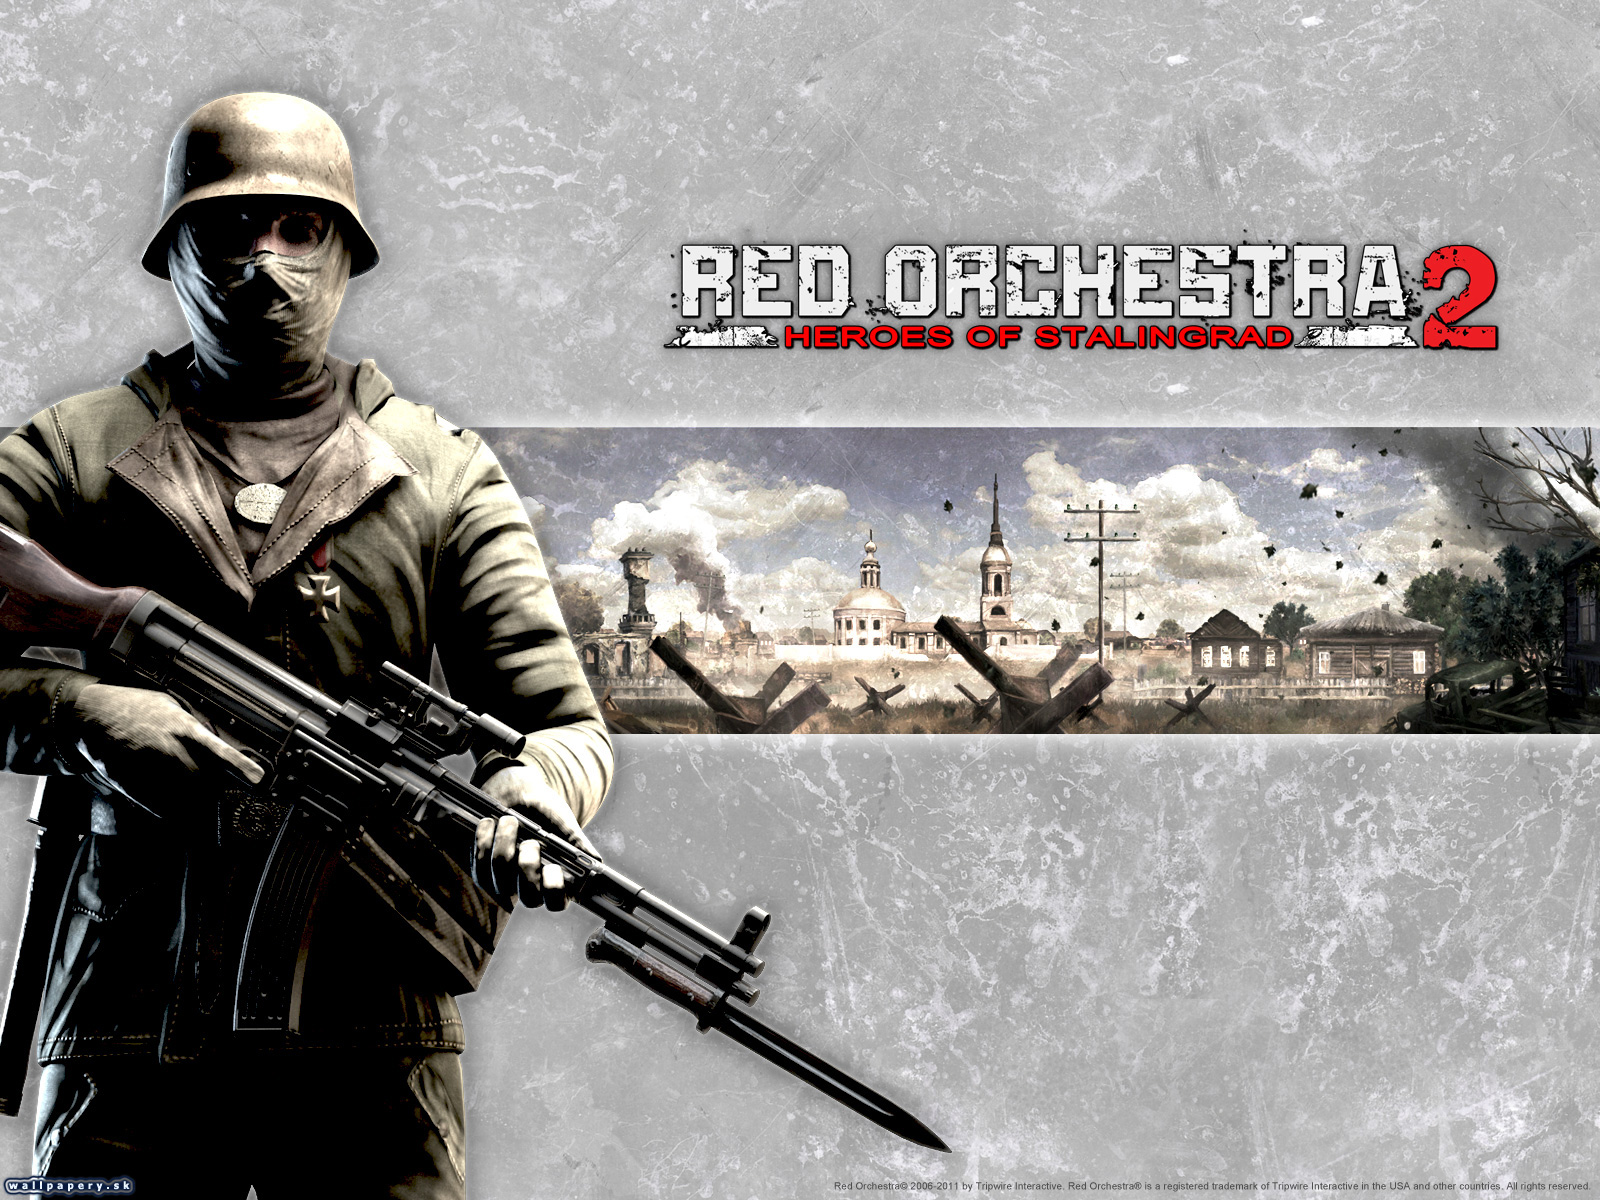 Red Orchestra 2: Heroes of Stalingrad - wallpaper 6